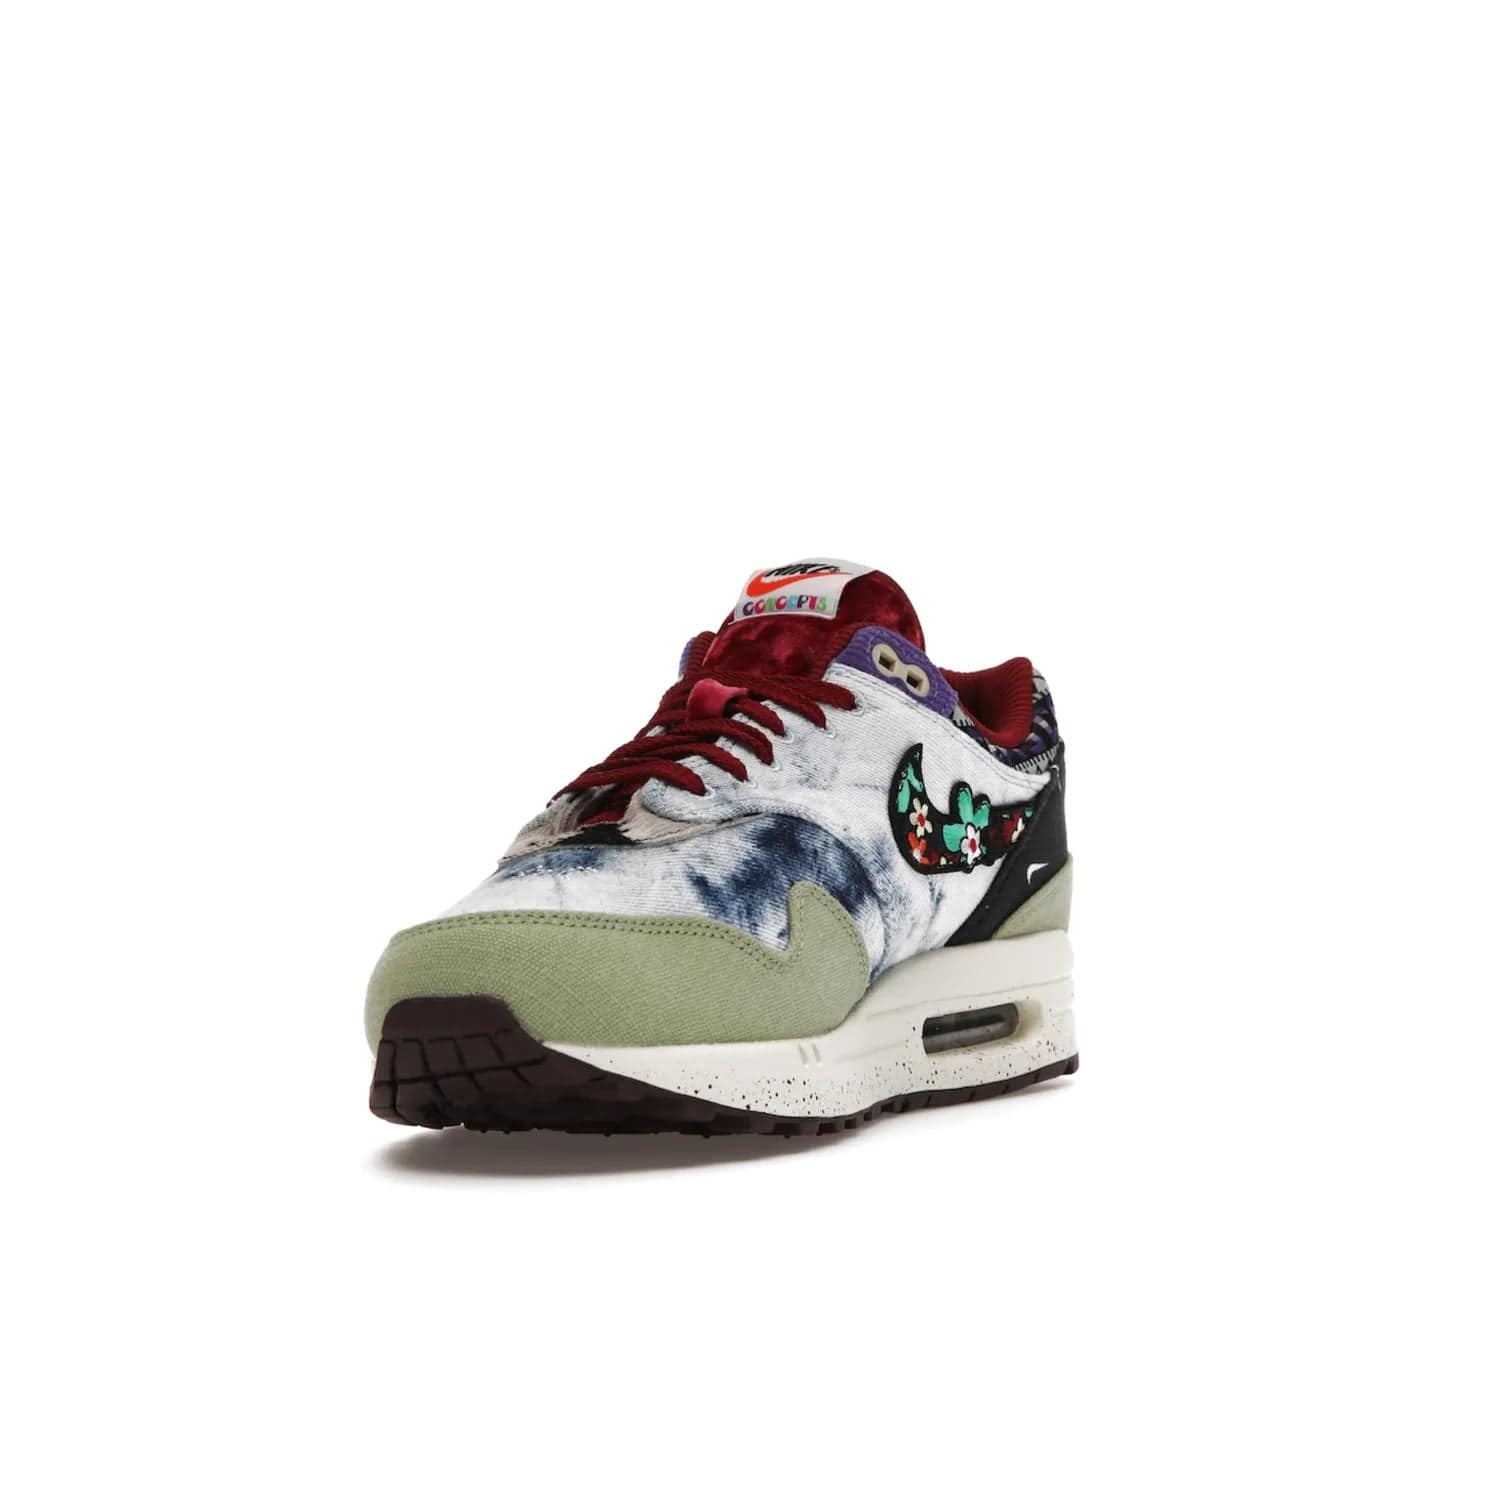 Nike Air Max 1 SP Concepts Mellow - Image 13 - Only at www.BallersClubKickz.com - The Nike Air Max 1 SP Concepts Mellow combines classic and modern style with unique materials, embroidery, and a speckled sole. Get heads turning with this stylish sneaker, releasing March 2022.